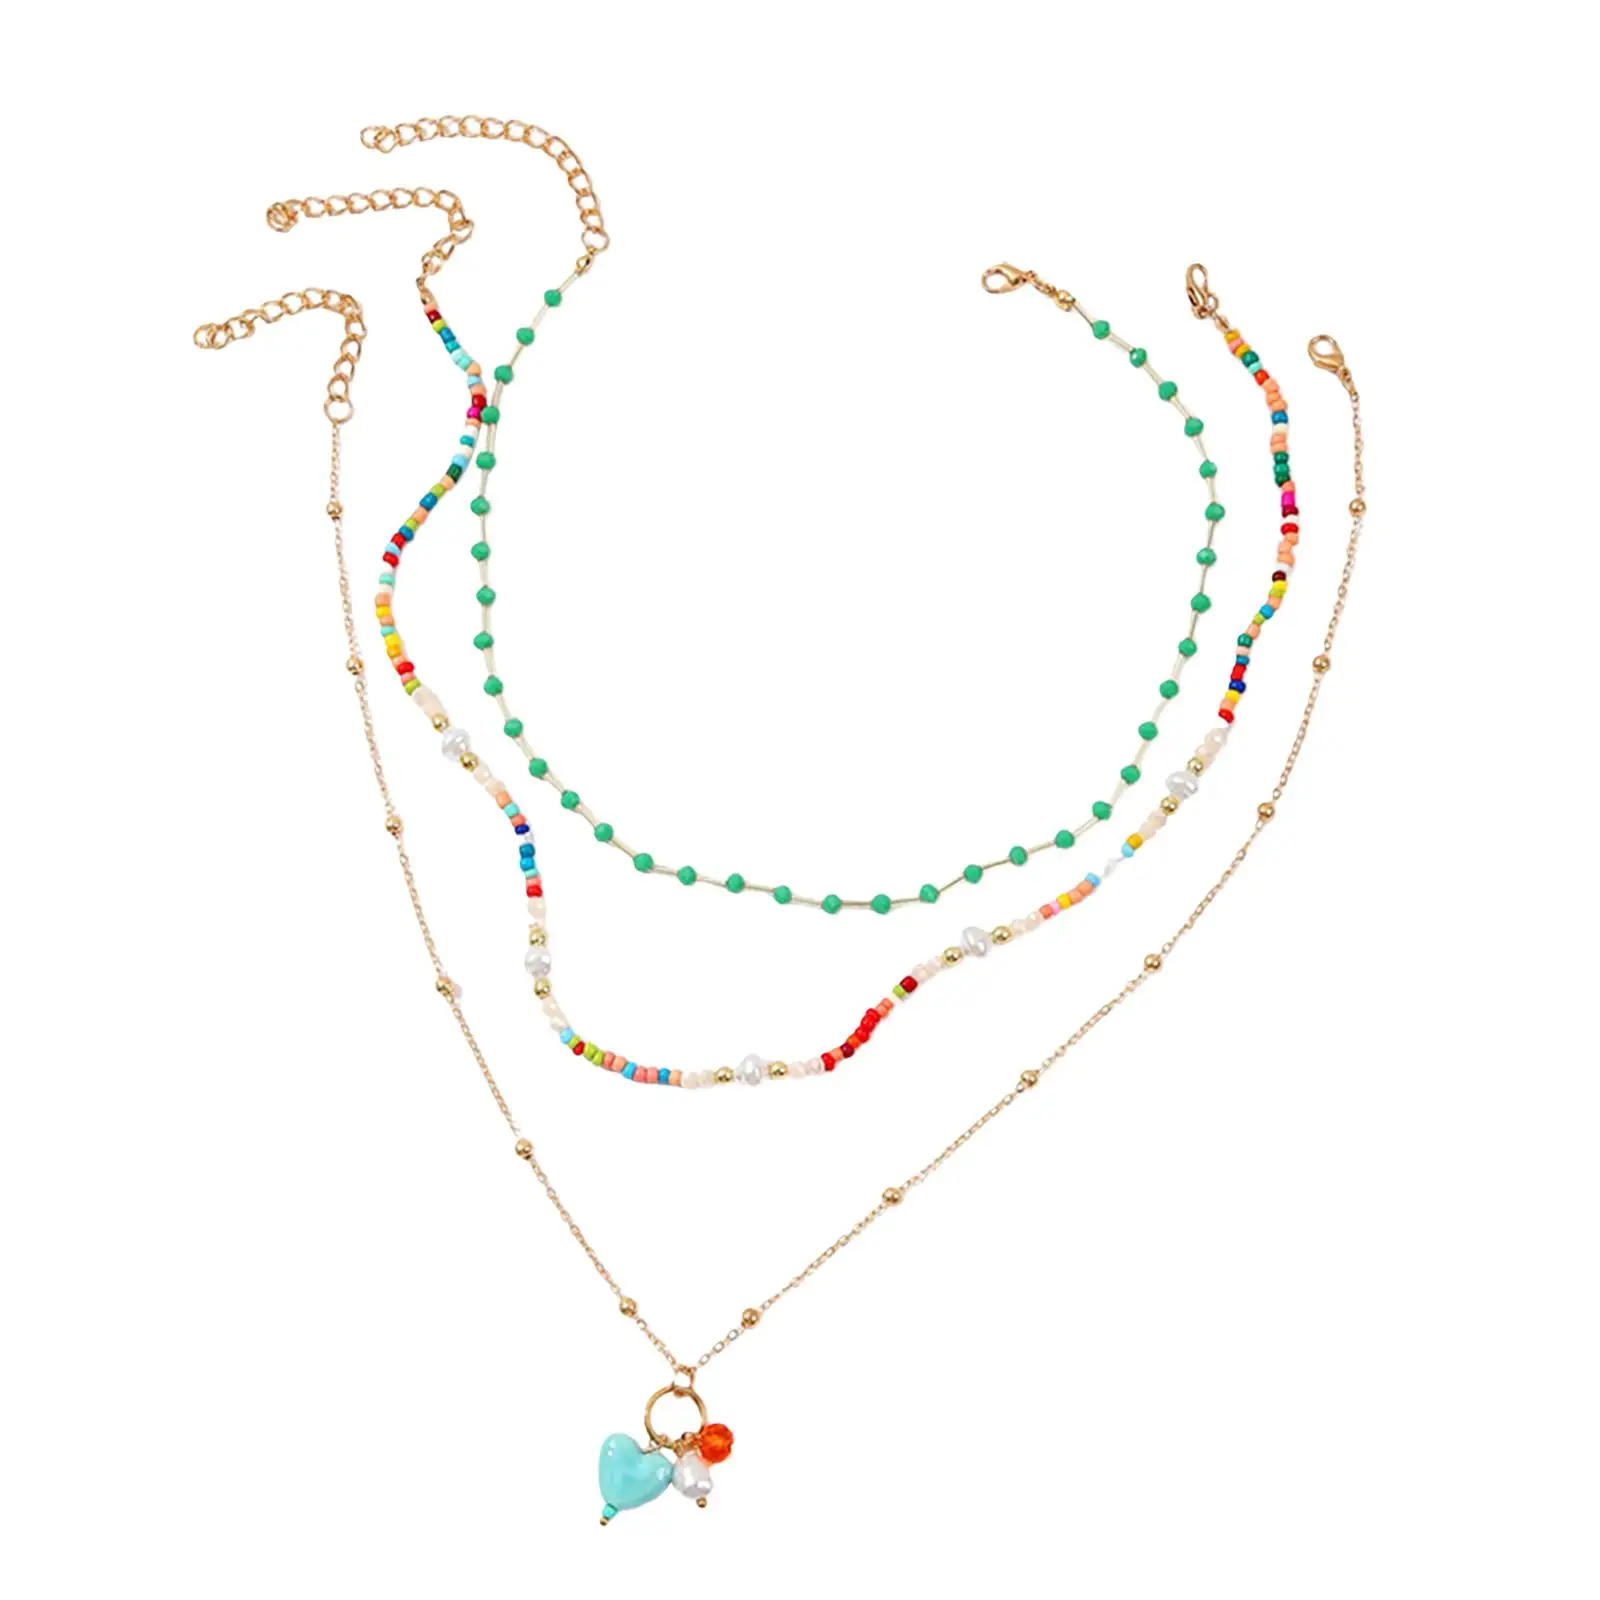 3x Layered Necklaces Set Mixed Multi Colored Cute Multilayer for Wedding